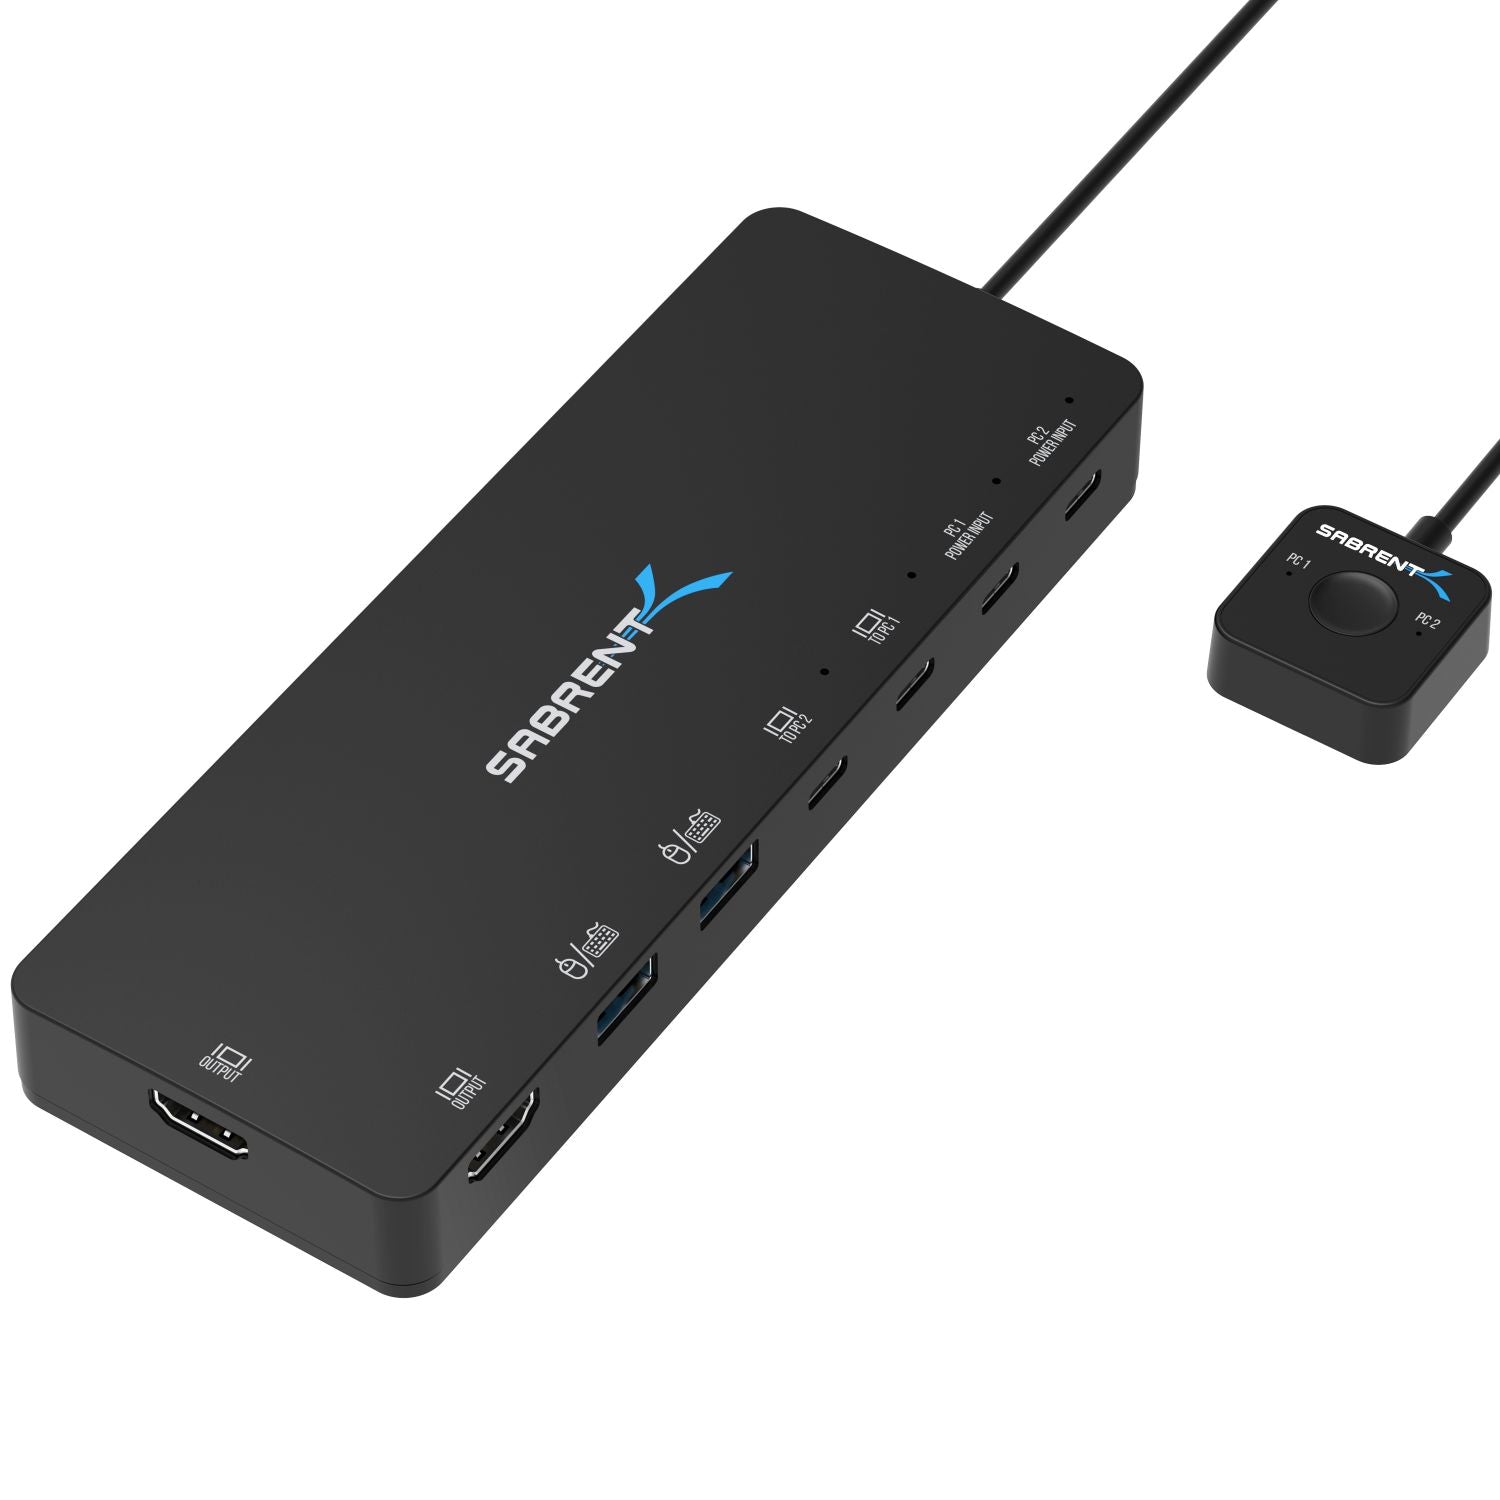 2 Port 2-to-1 USB 3.0 Peripheral Sharing Switch – USB Powered